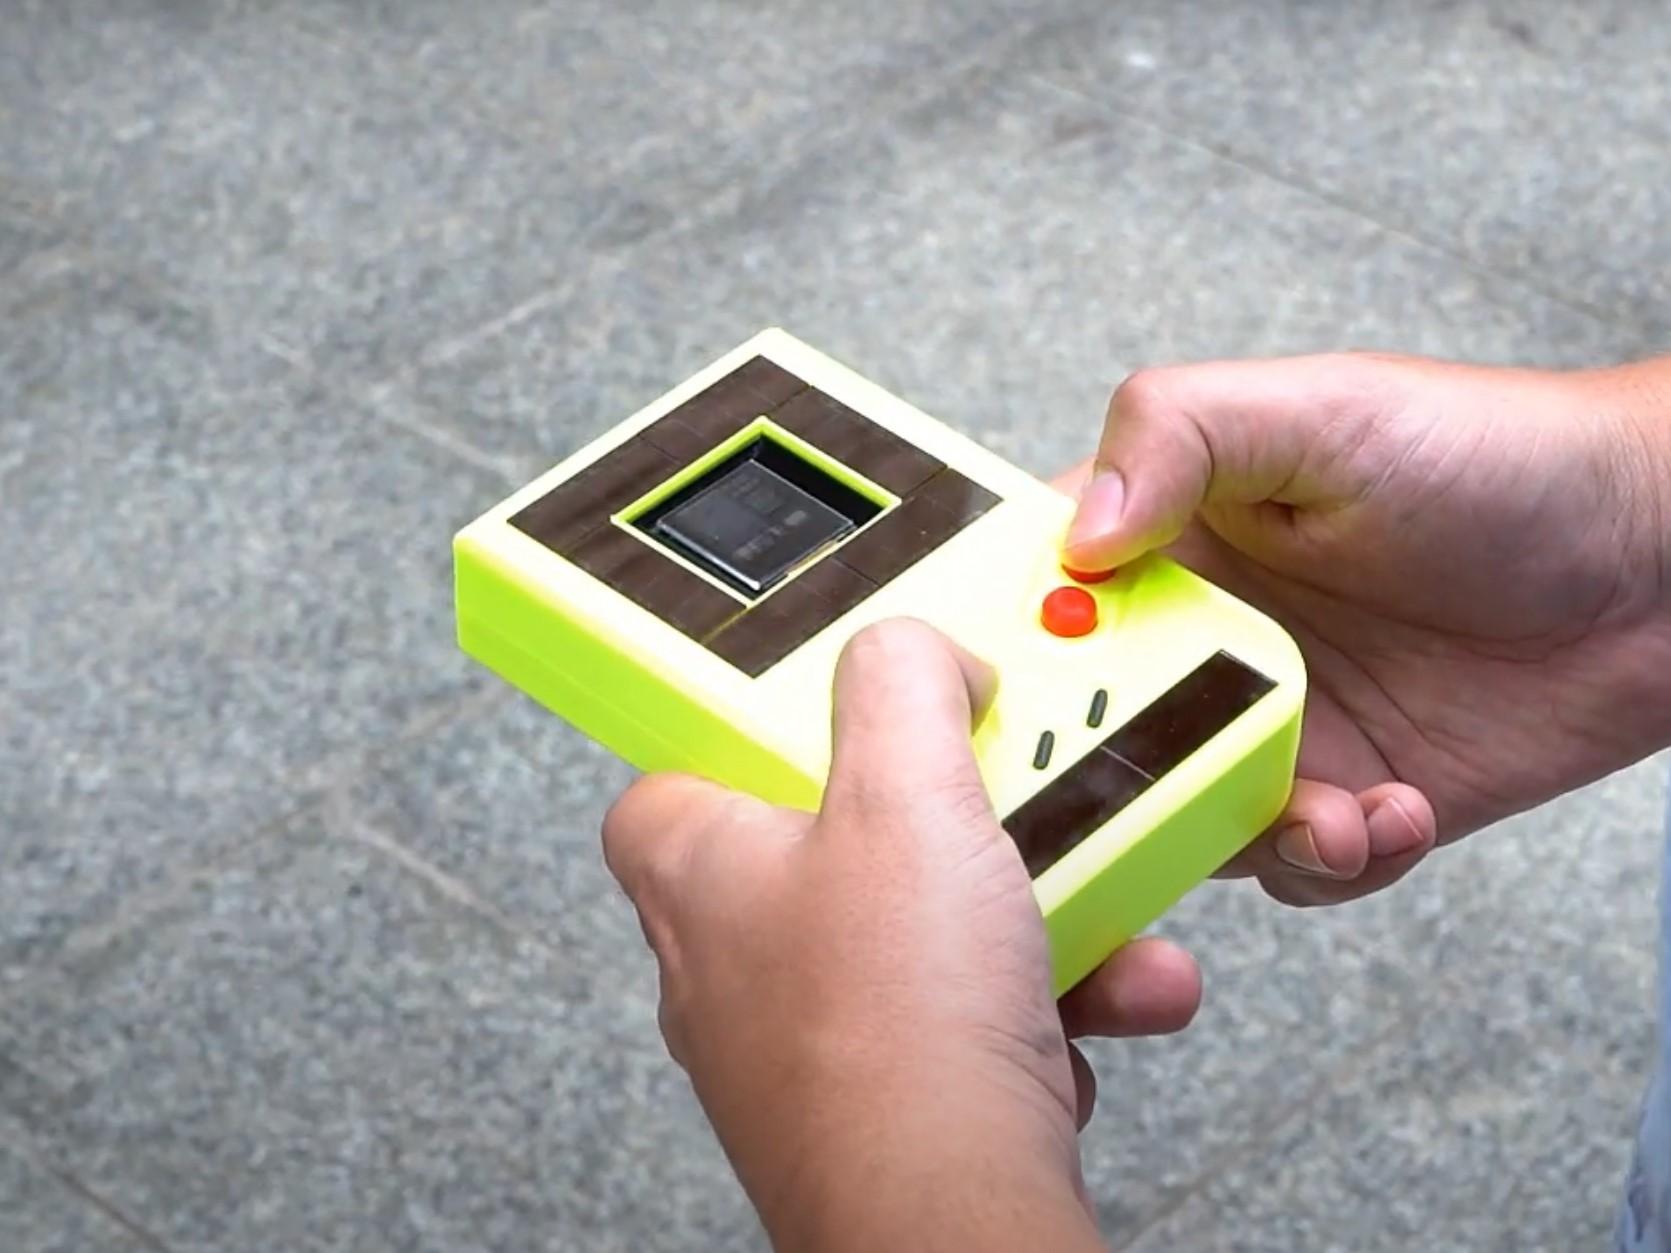 The modified Game Boy harvests energy from the sun - and the user